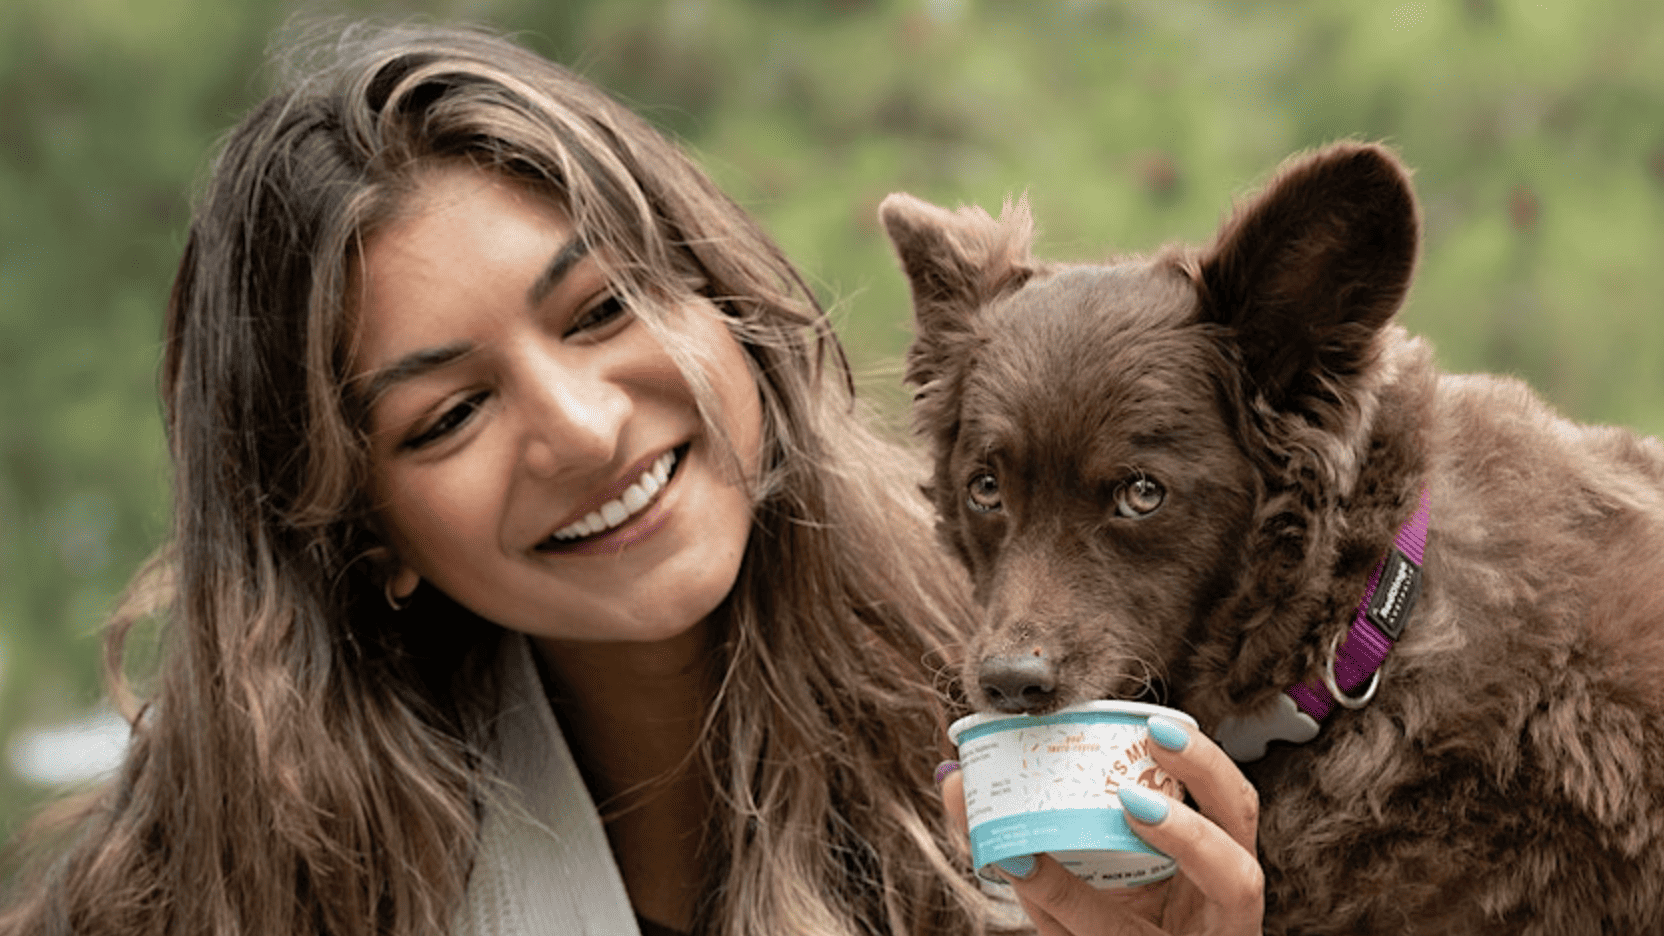 dog licks cup of ice cream that a woman is holding out